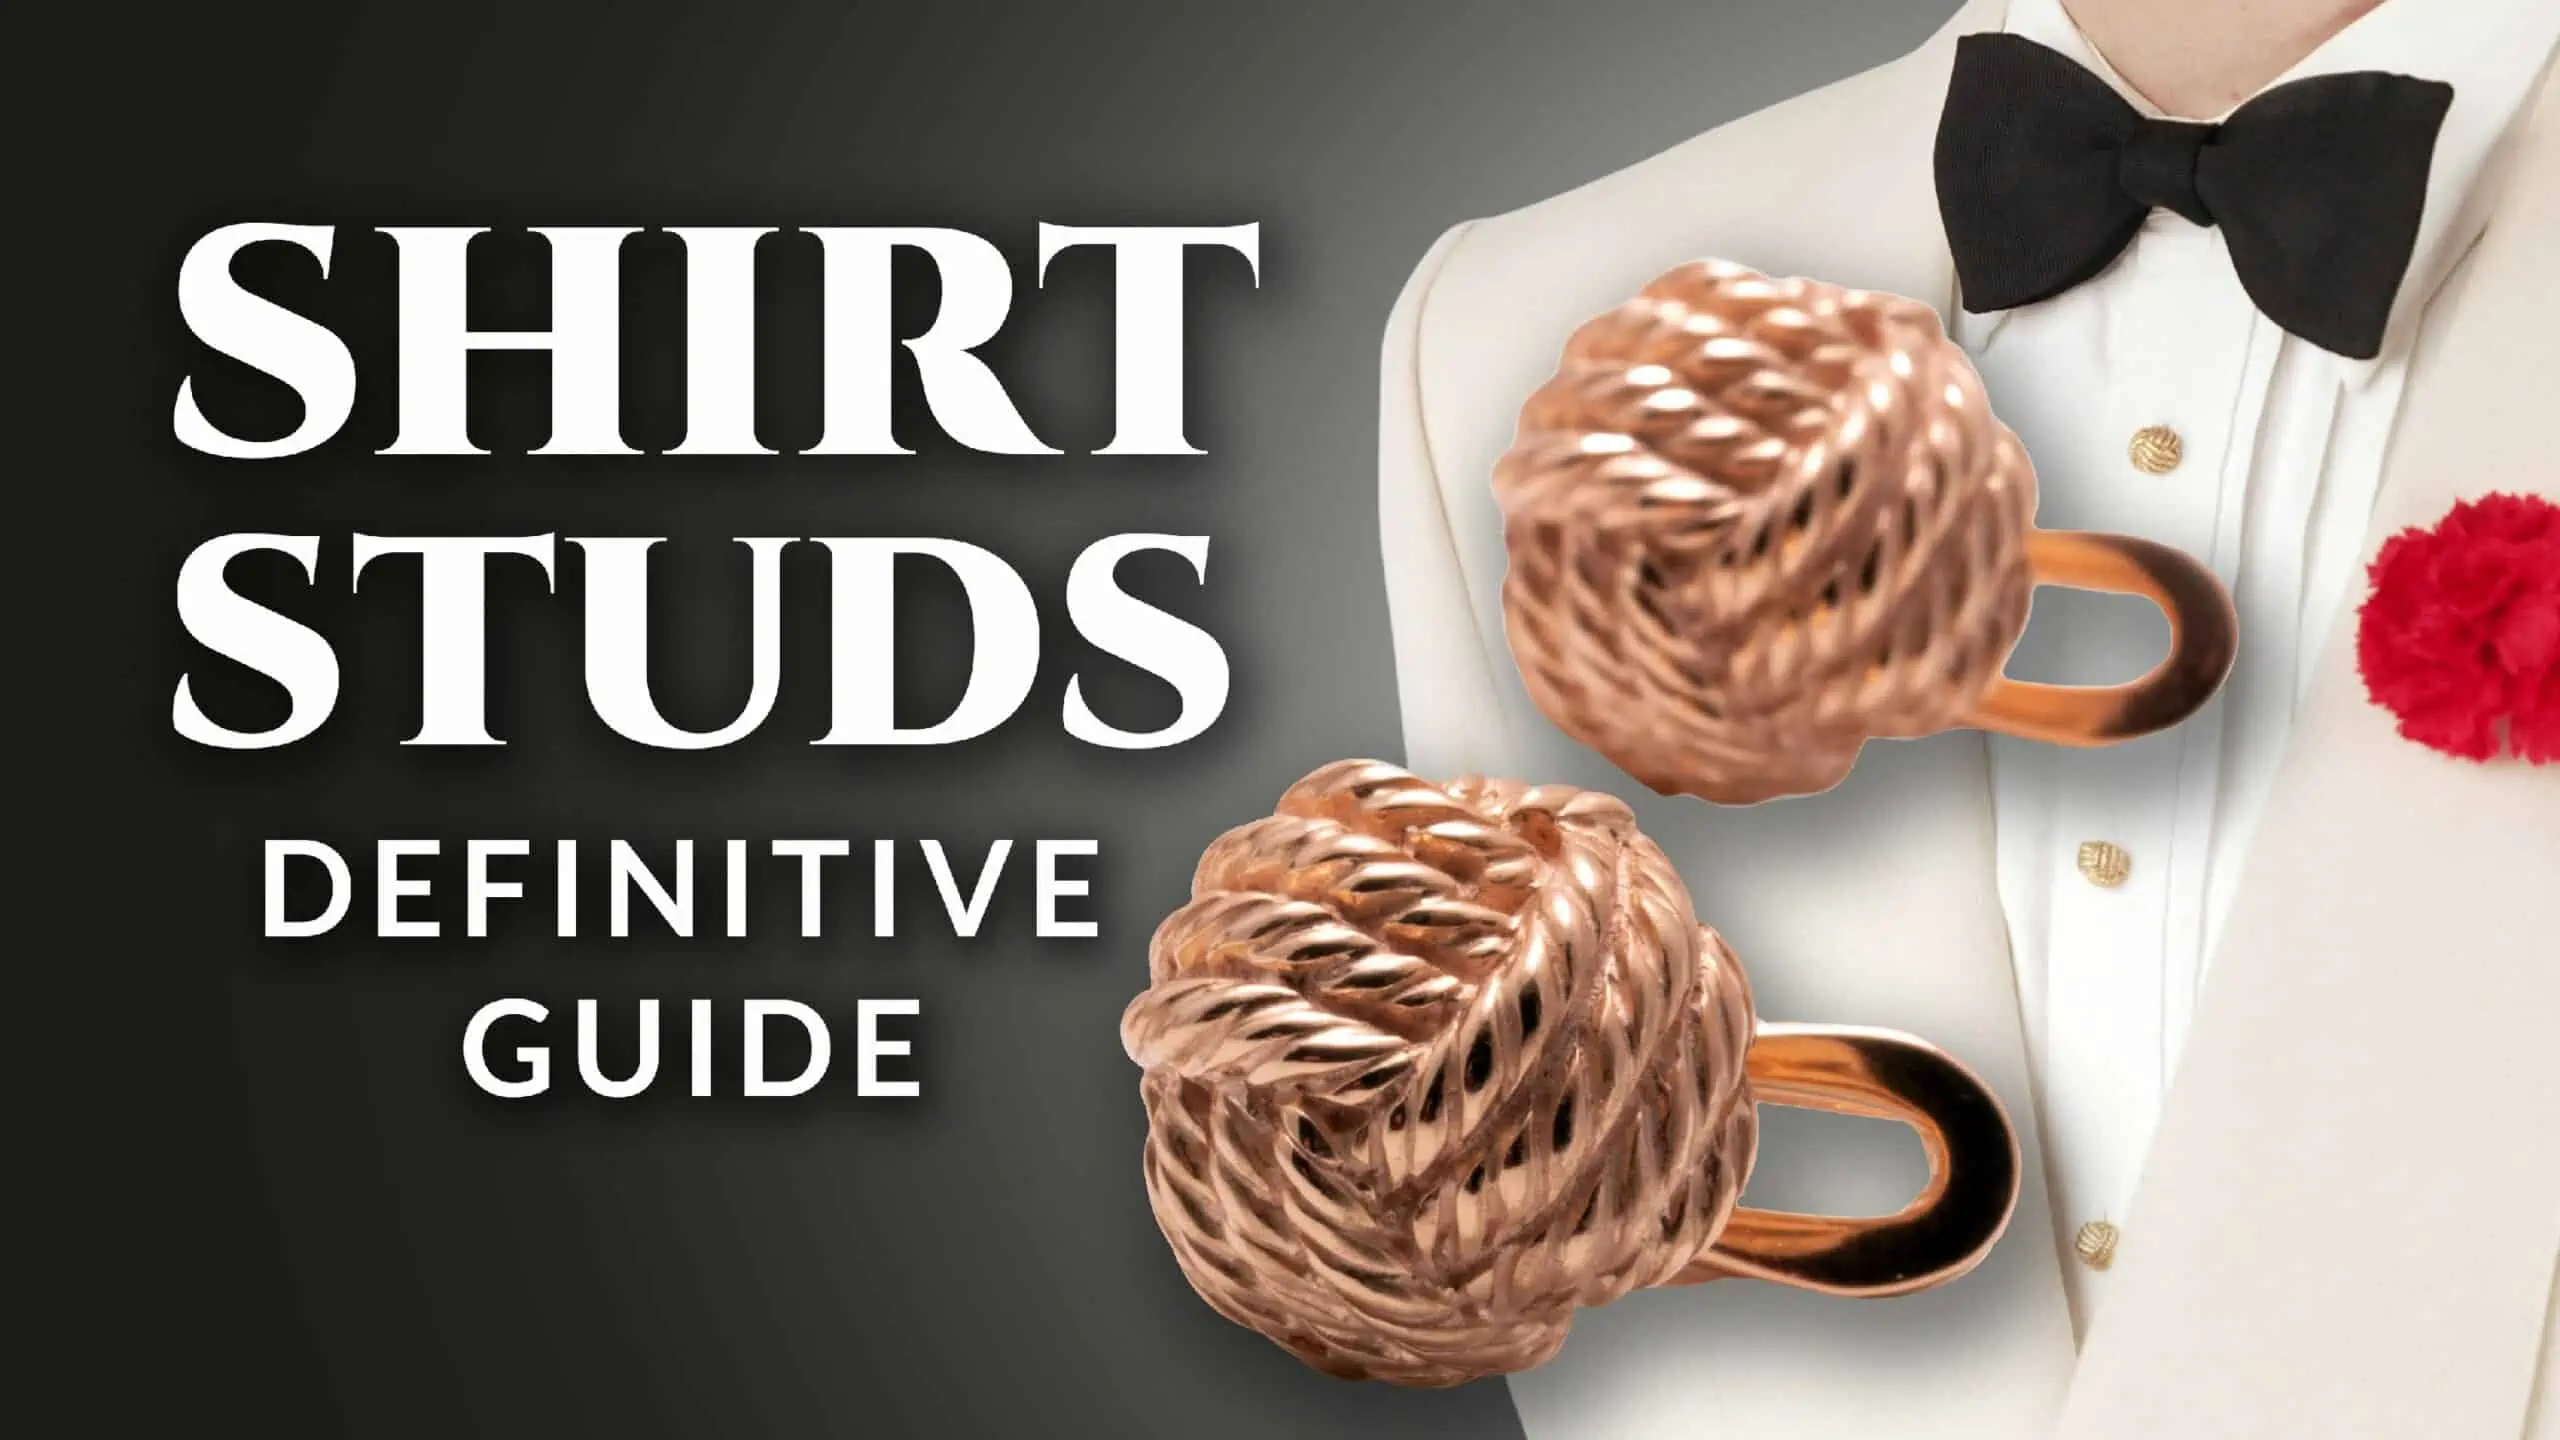 Shirt Studs Definitive Guide scaled